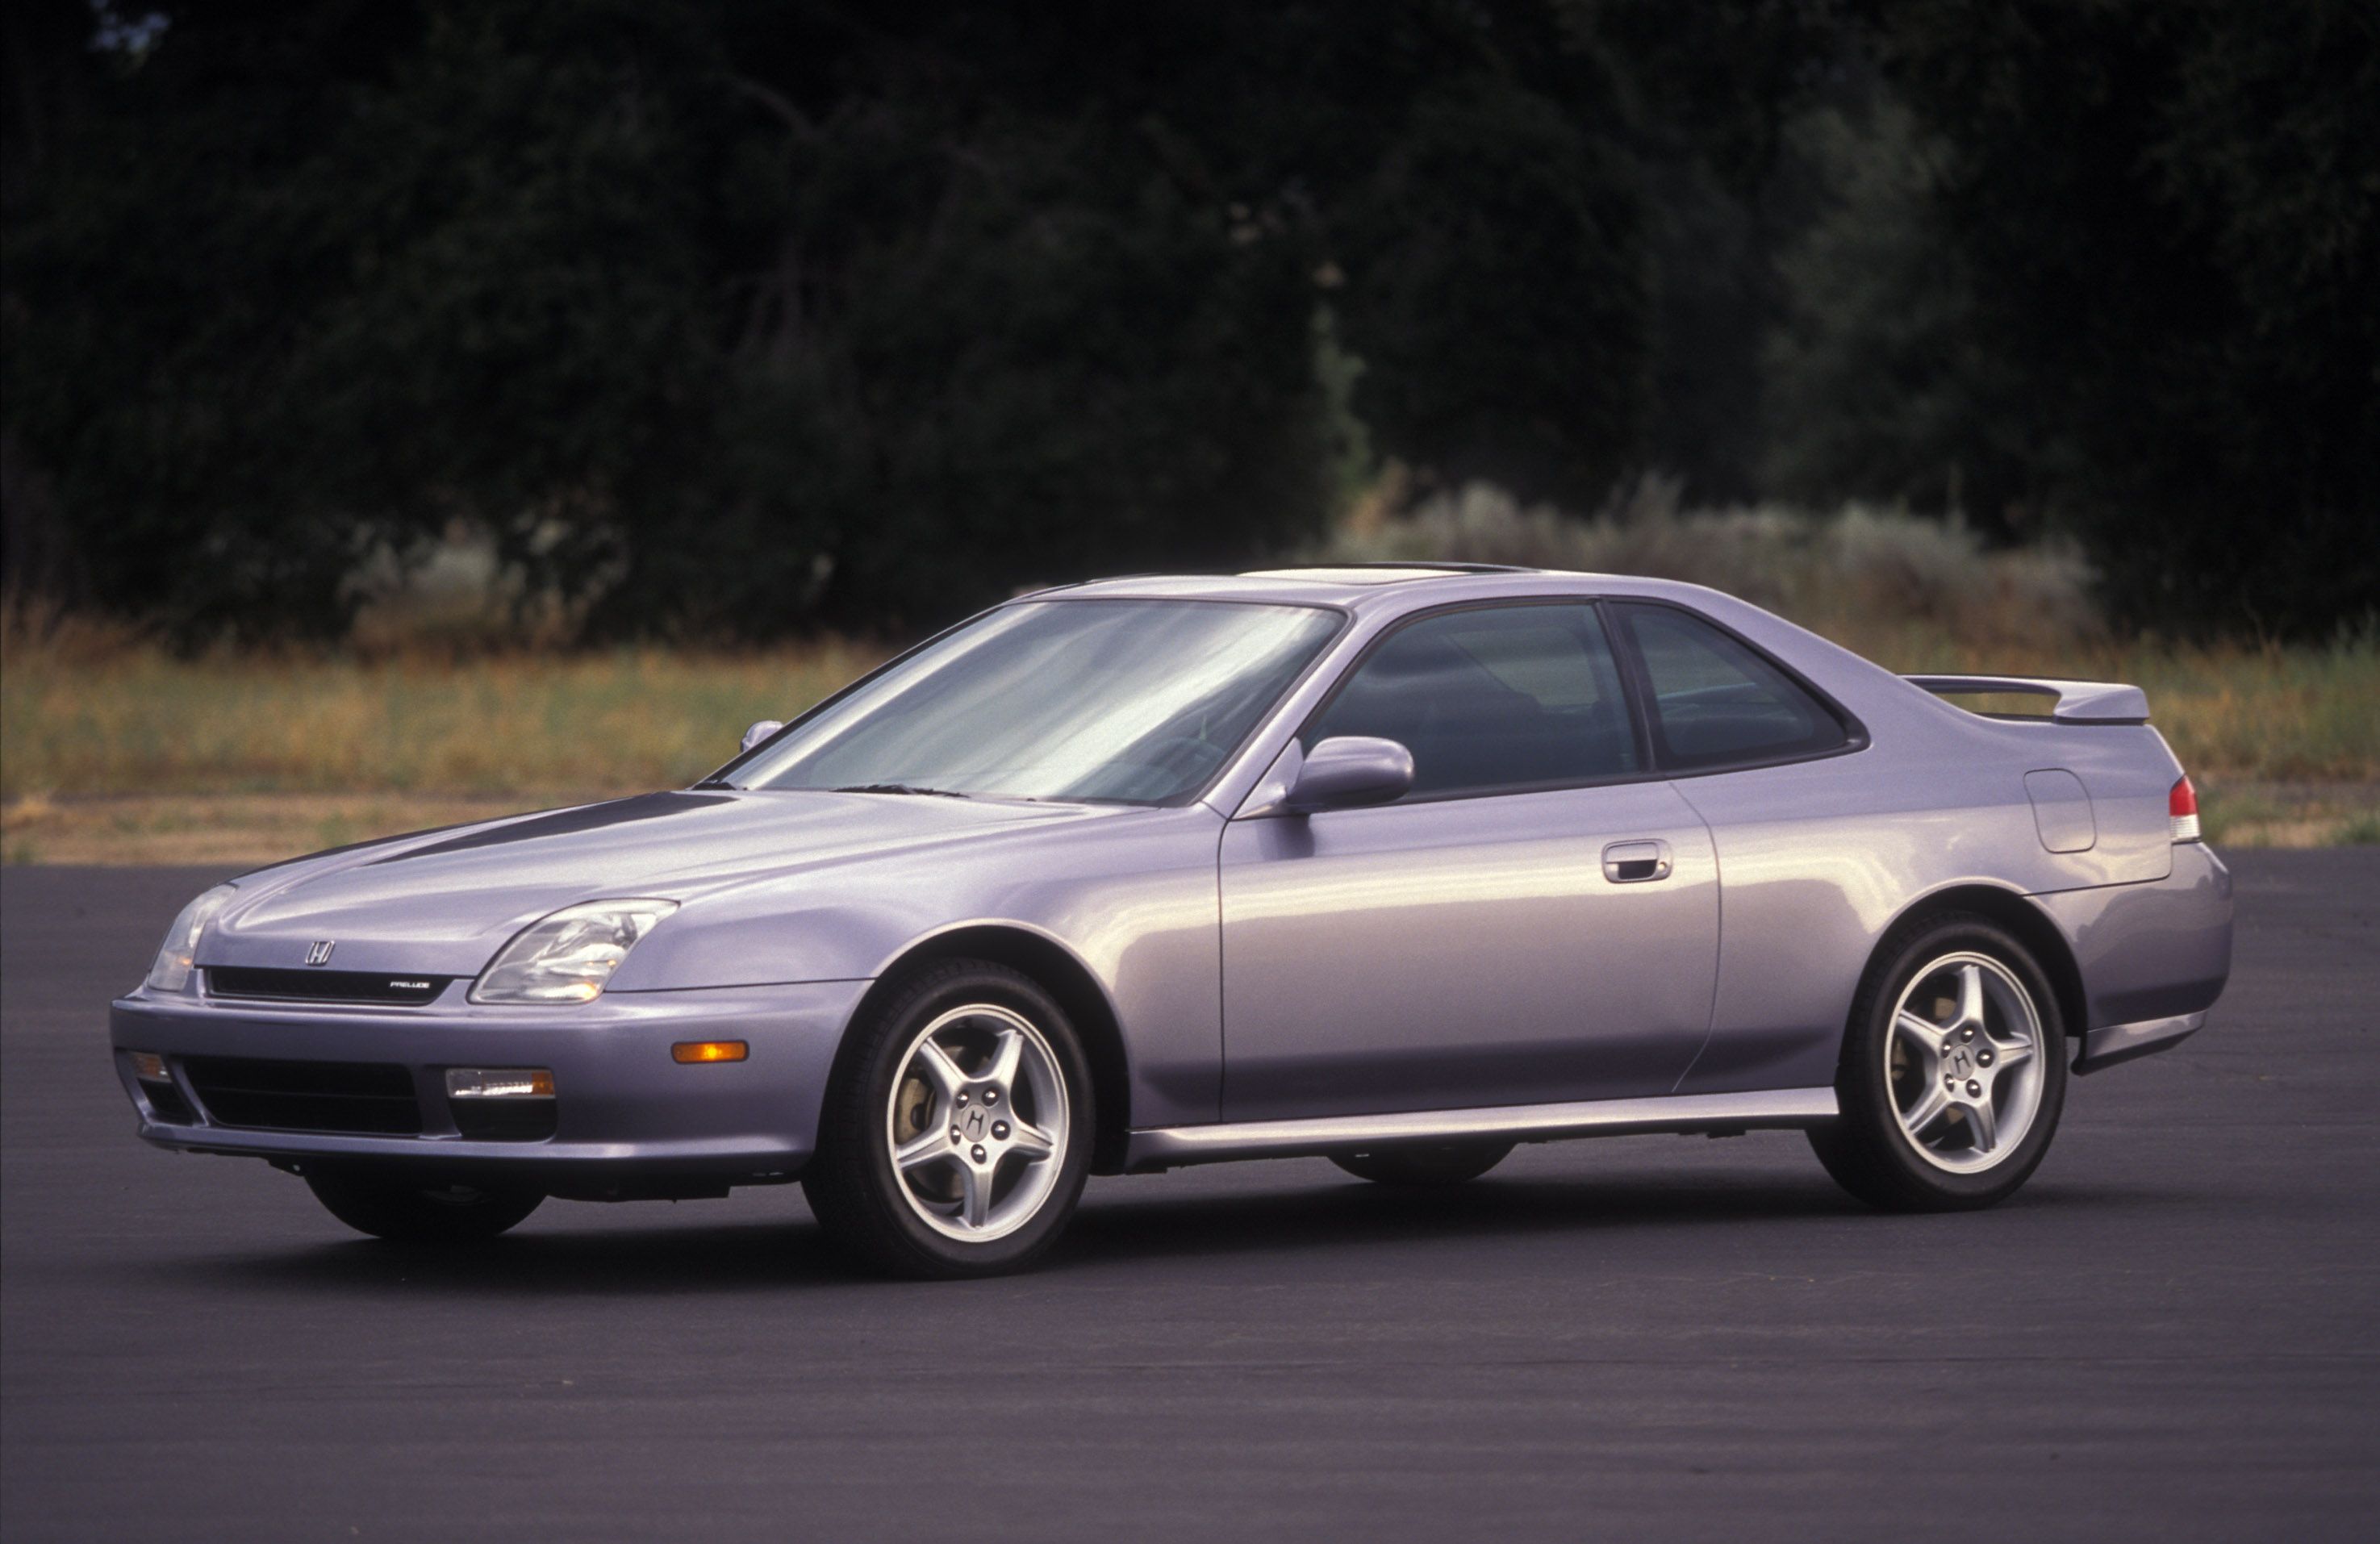 The 1999 Honda Prelude SH Is a Rolling Metaphor of My Youth